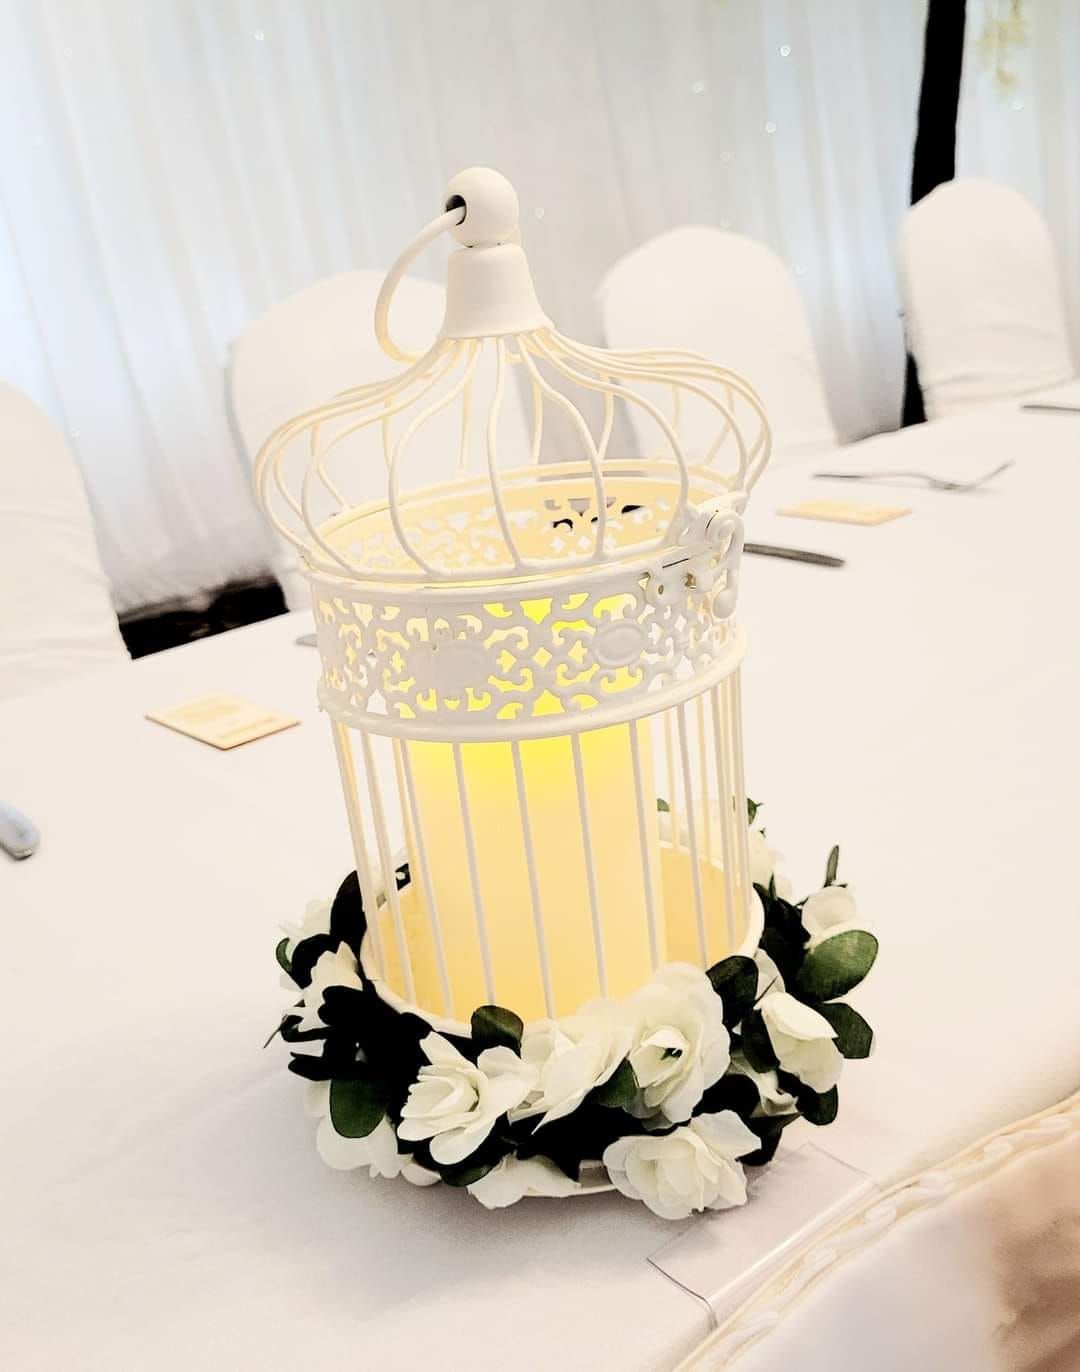 Small birdcage centrepiece with led candle